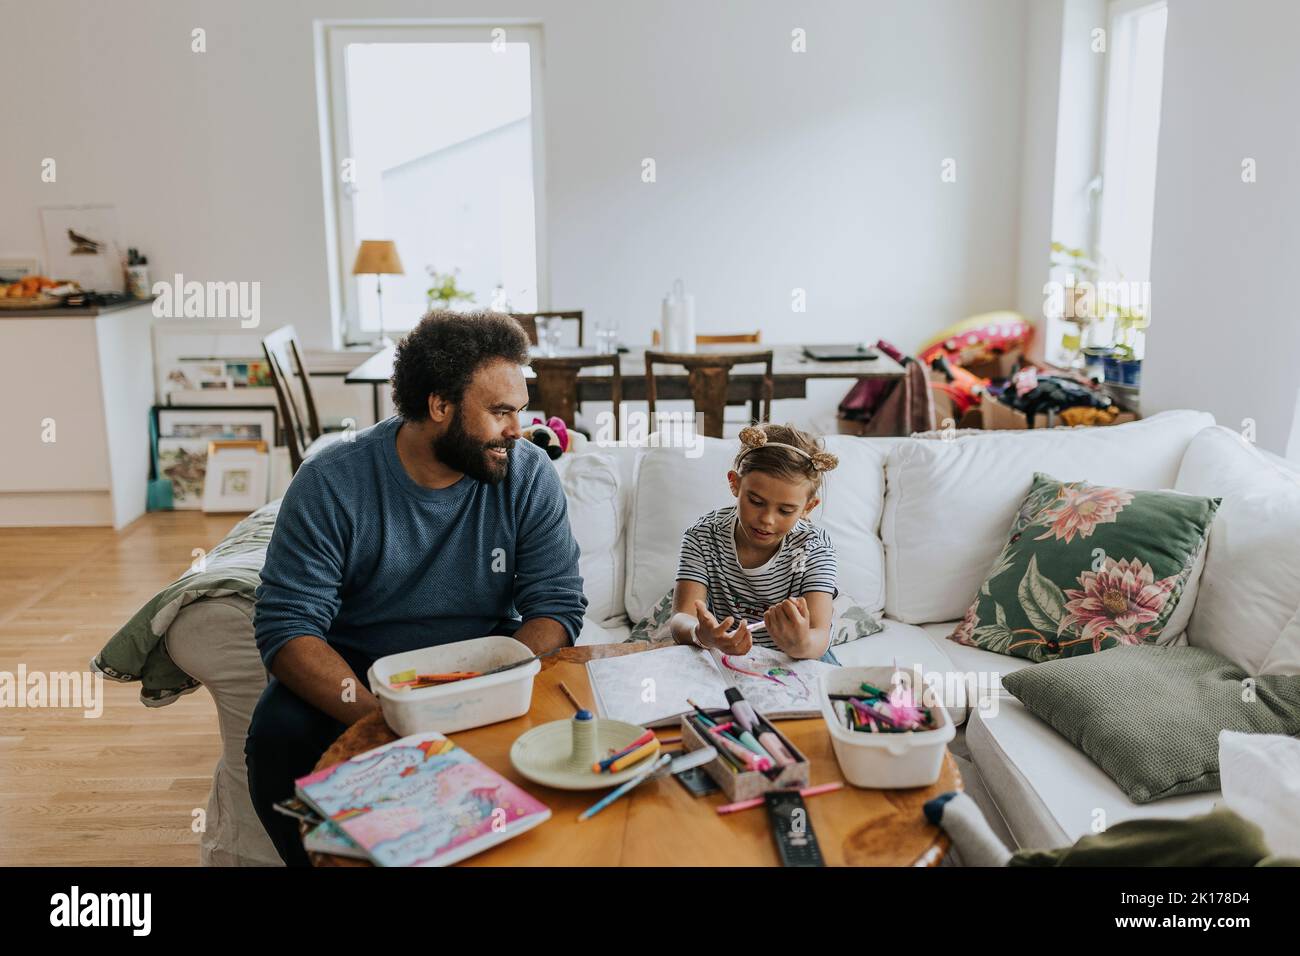 Father and child sitting in living room Stock Photo